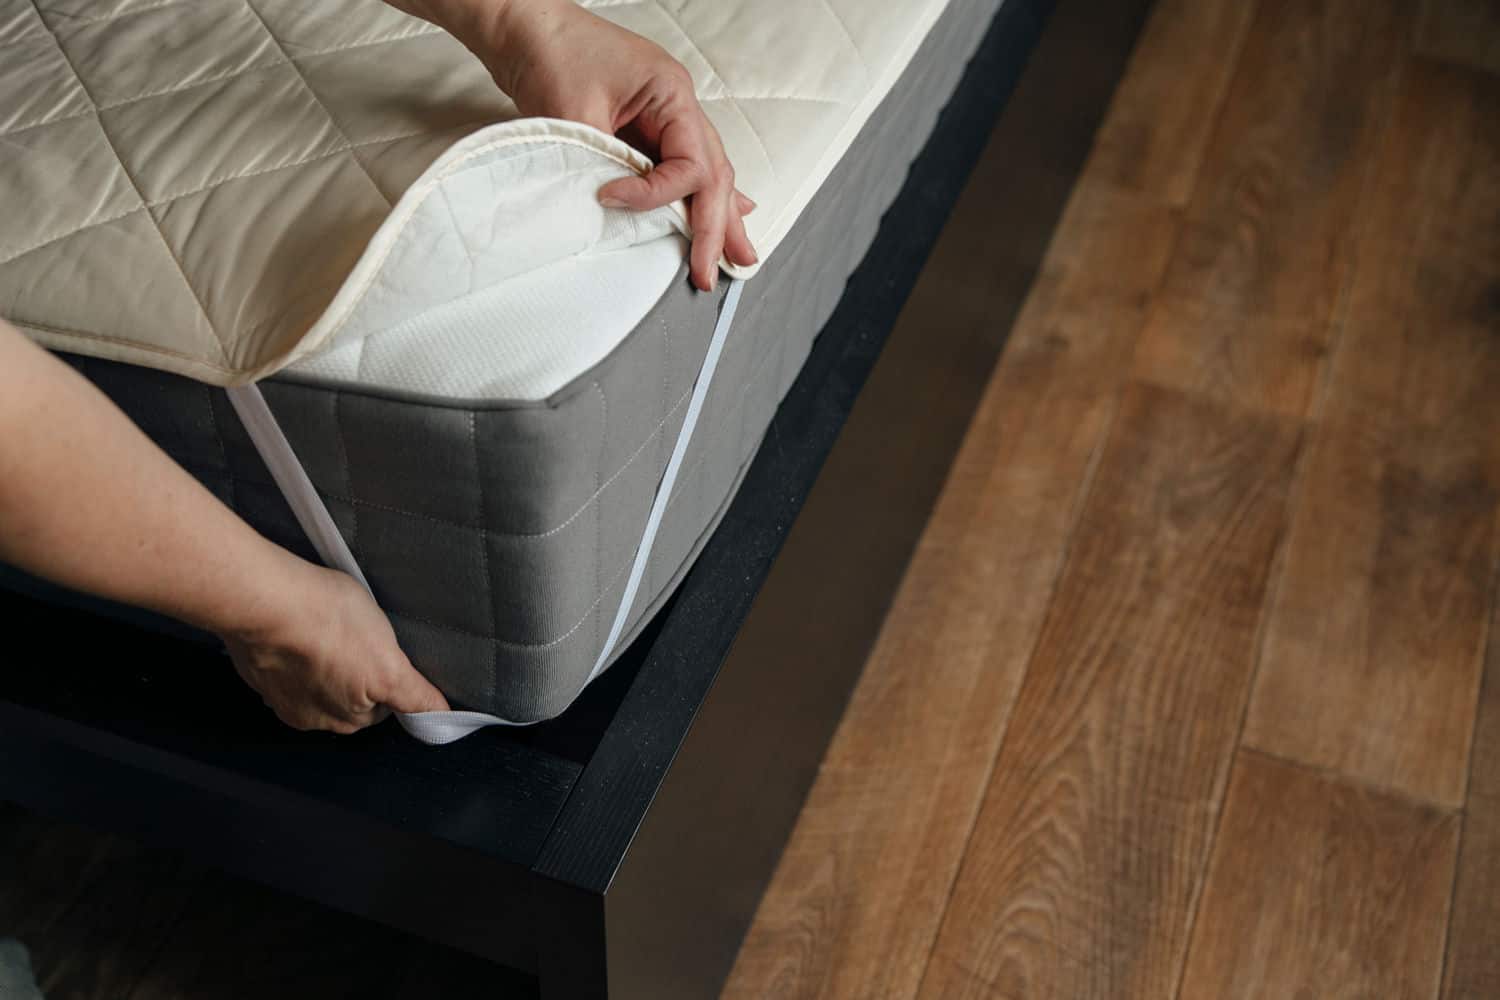 Two hands securing a white mattress cover on a mattress